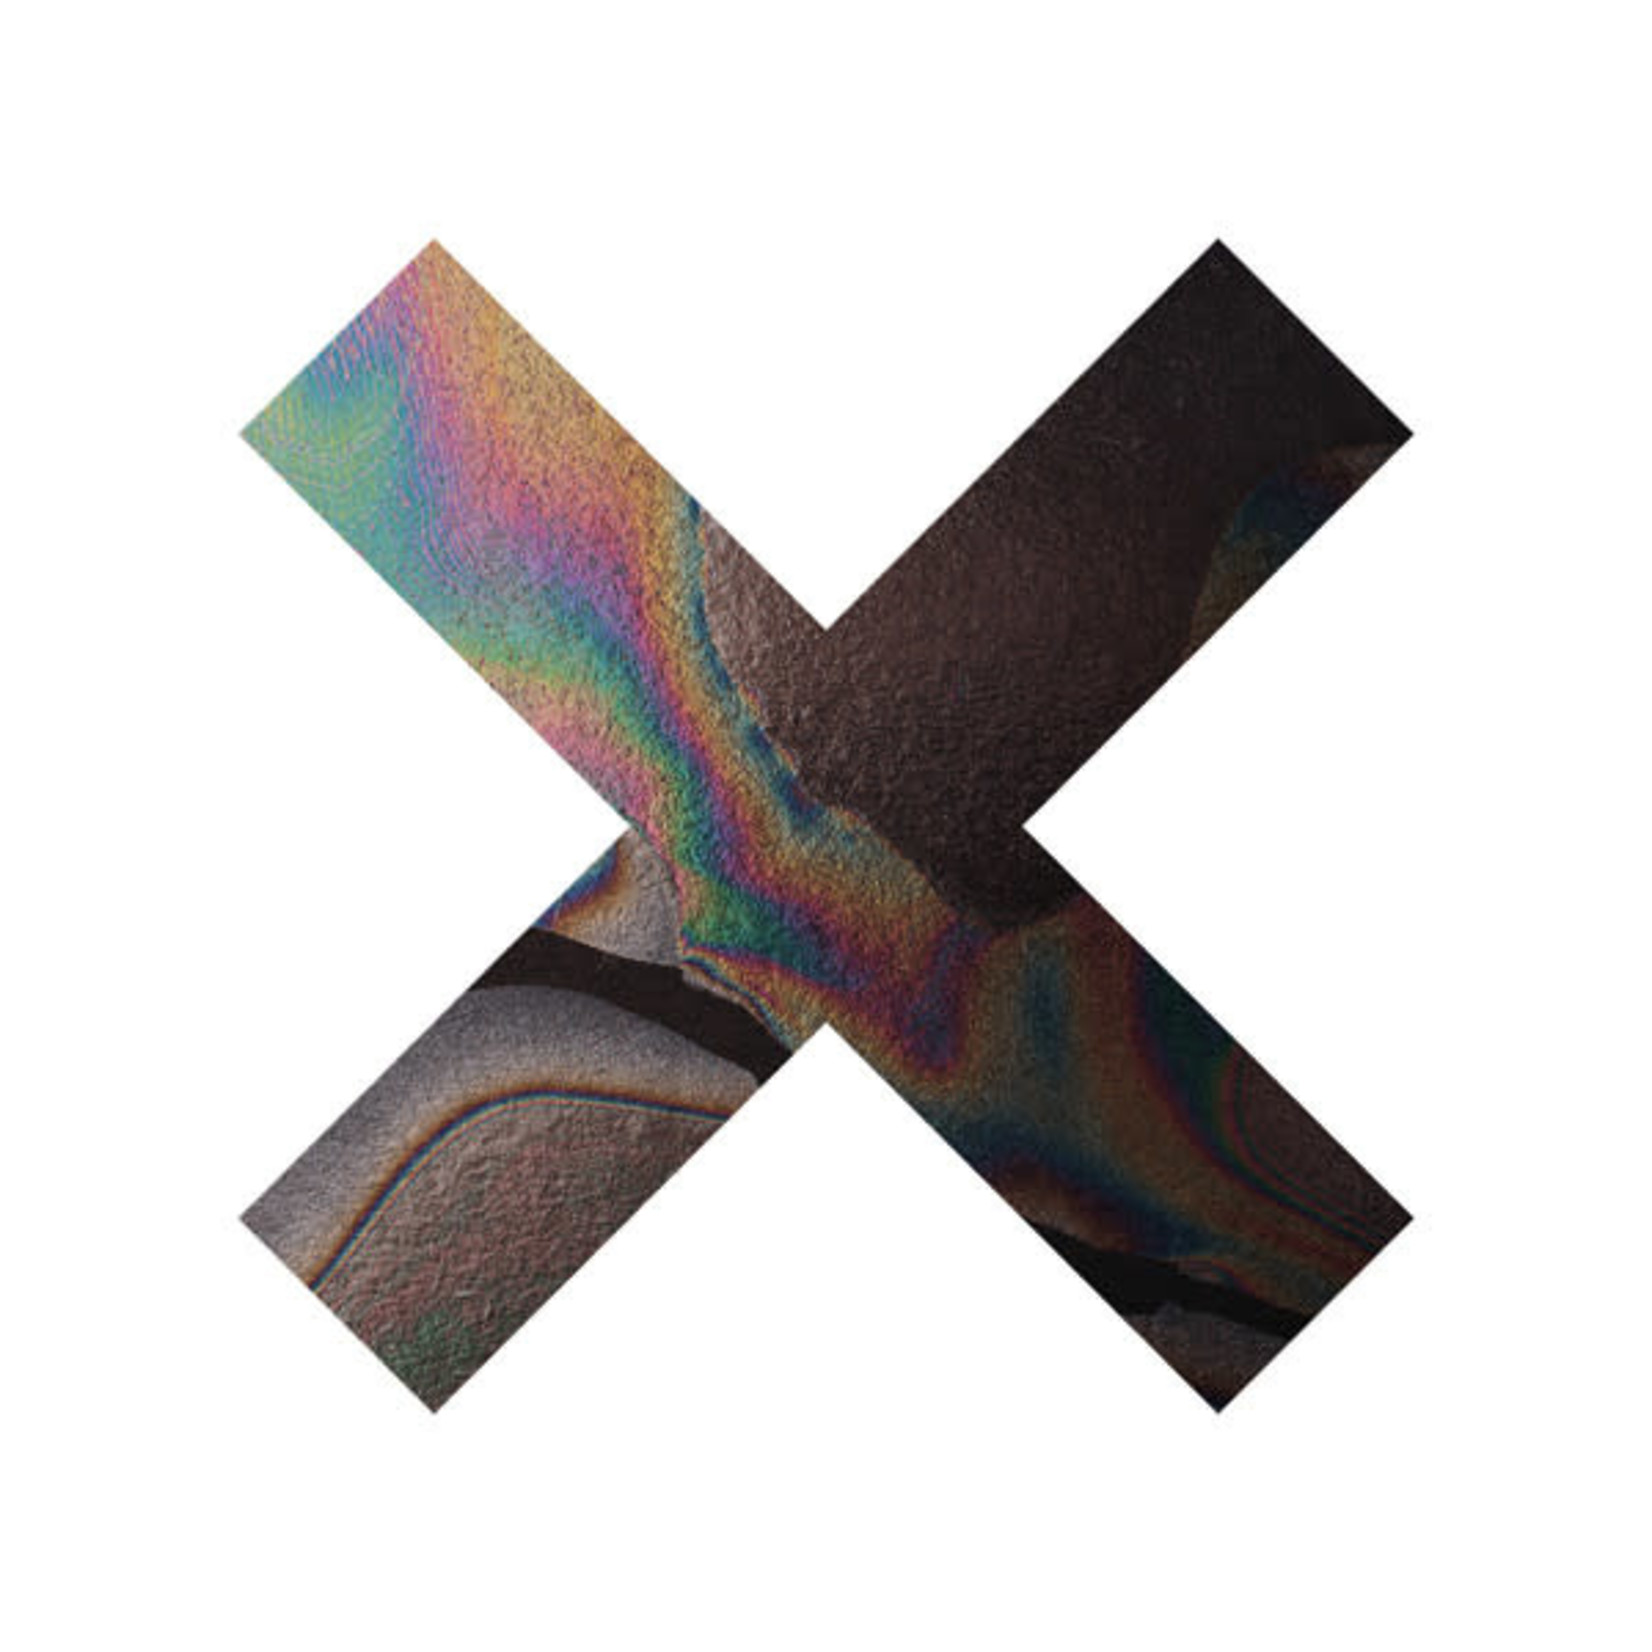 [New] xx, The: Coexist (10th anni. Colour) [YOUNG TURKS]